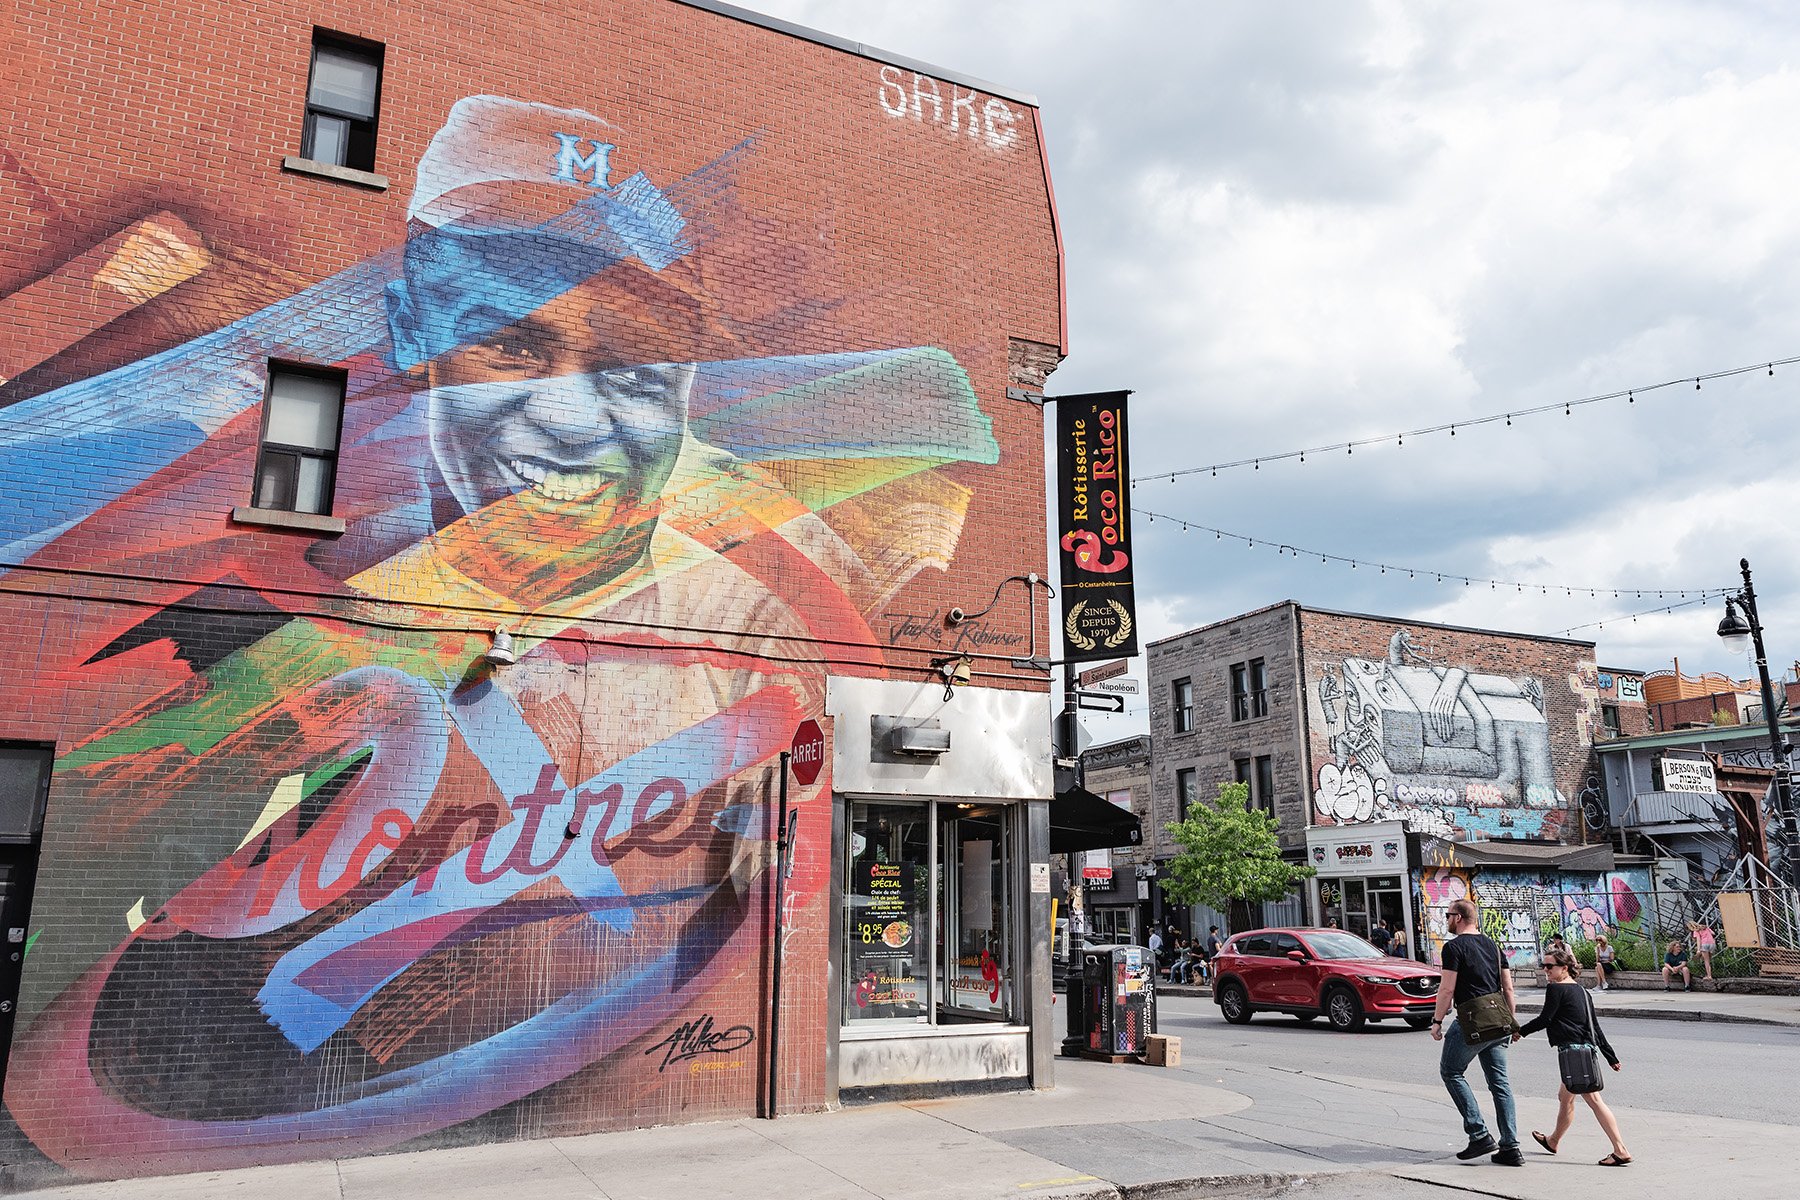 Another mural photographed in Montreal by David Giral shows Jackie Robinson